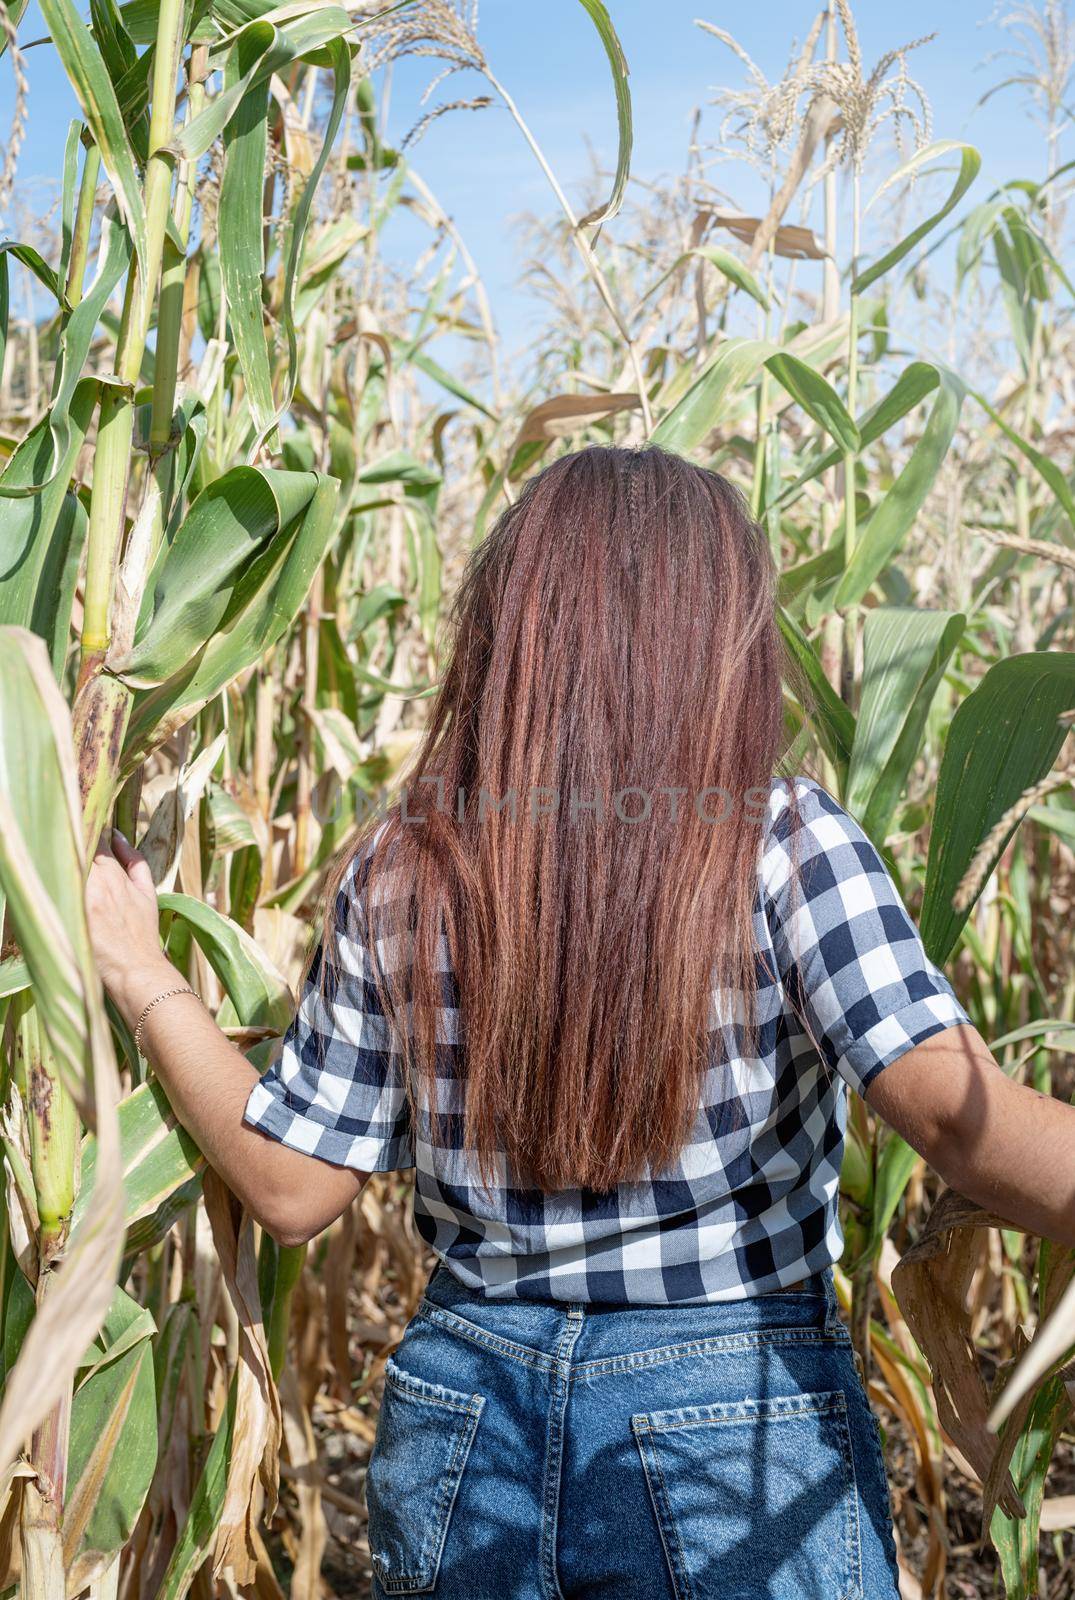 agriculture and cultivation concept. Countryside. Cheerful female caucasian woman in the corn crop